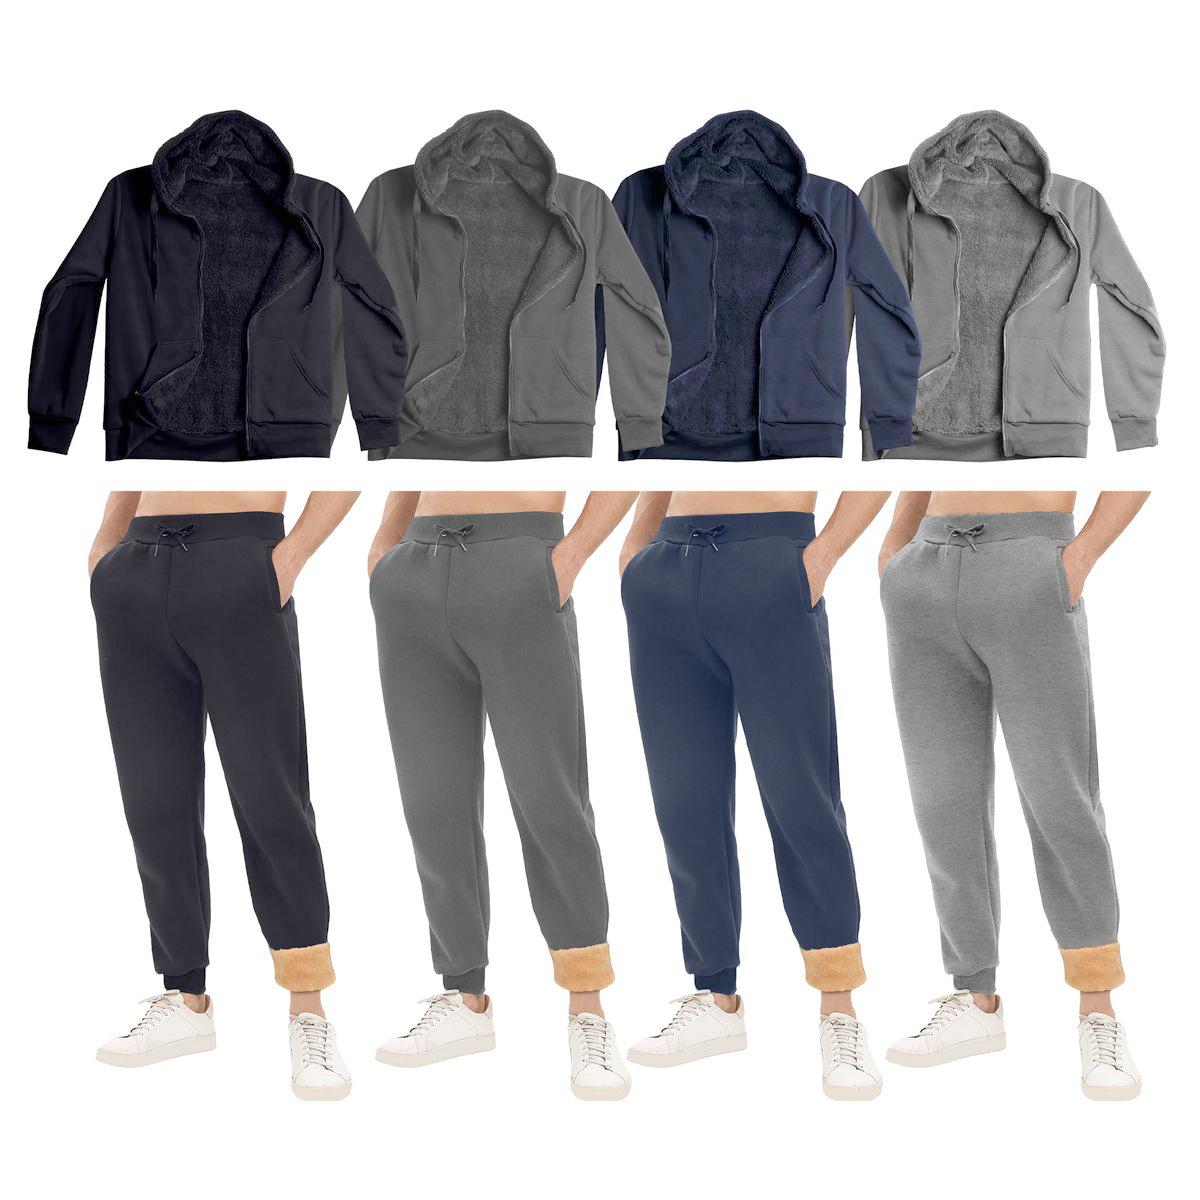 Men's Big & Tall Casual Super Soft Winter Warm Thick Sherpa Lined Sweatsuit Jogger Set - Grey, Xx-large